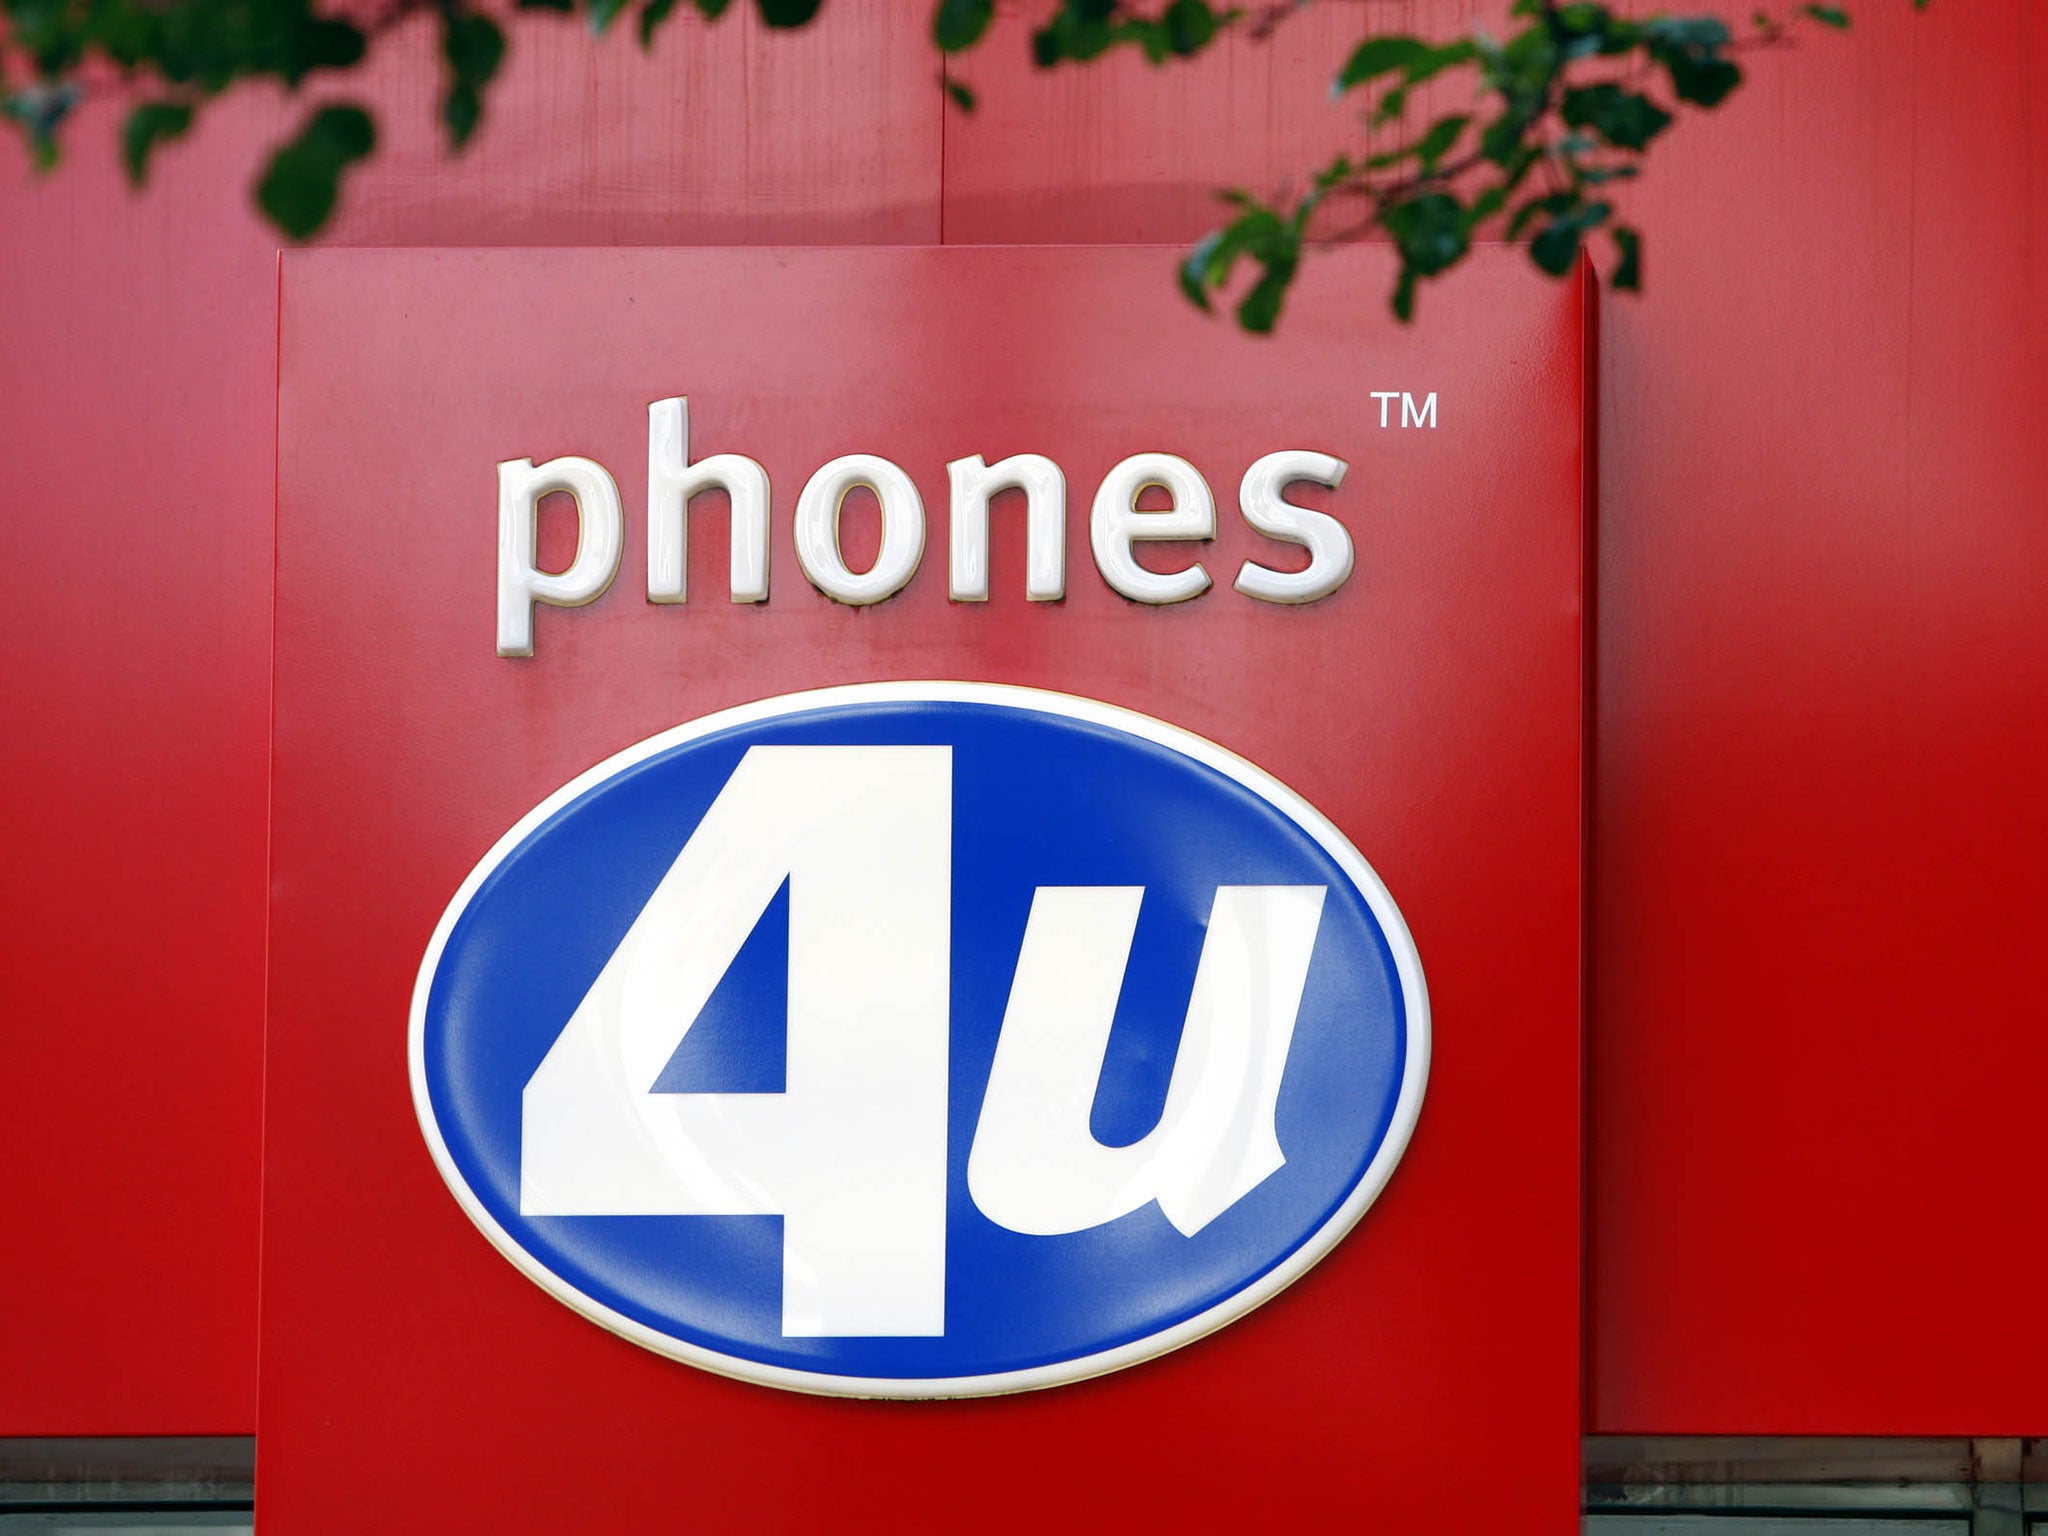 Phones 4u is to go into administration after network operator EE joined Vodafone in cutting ties with the retailer